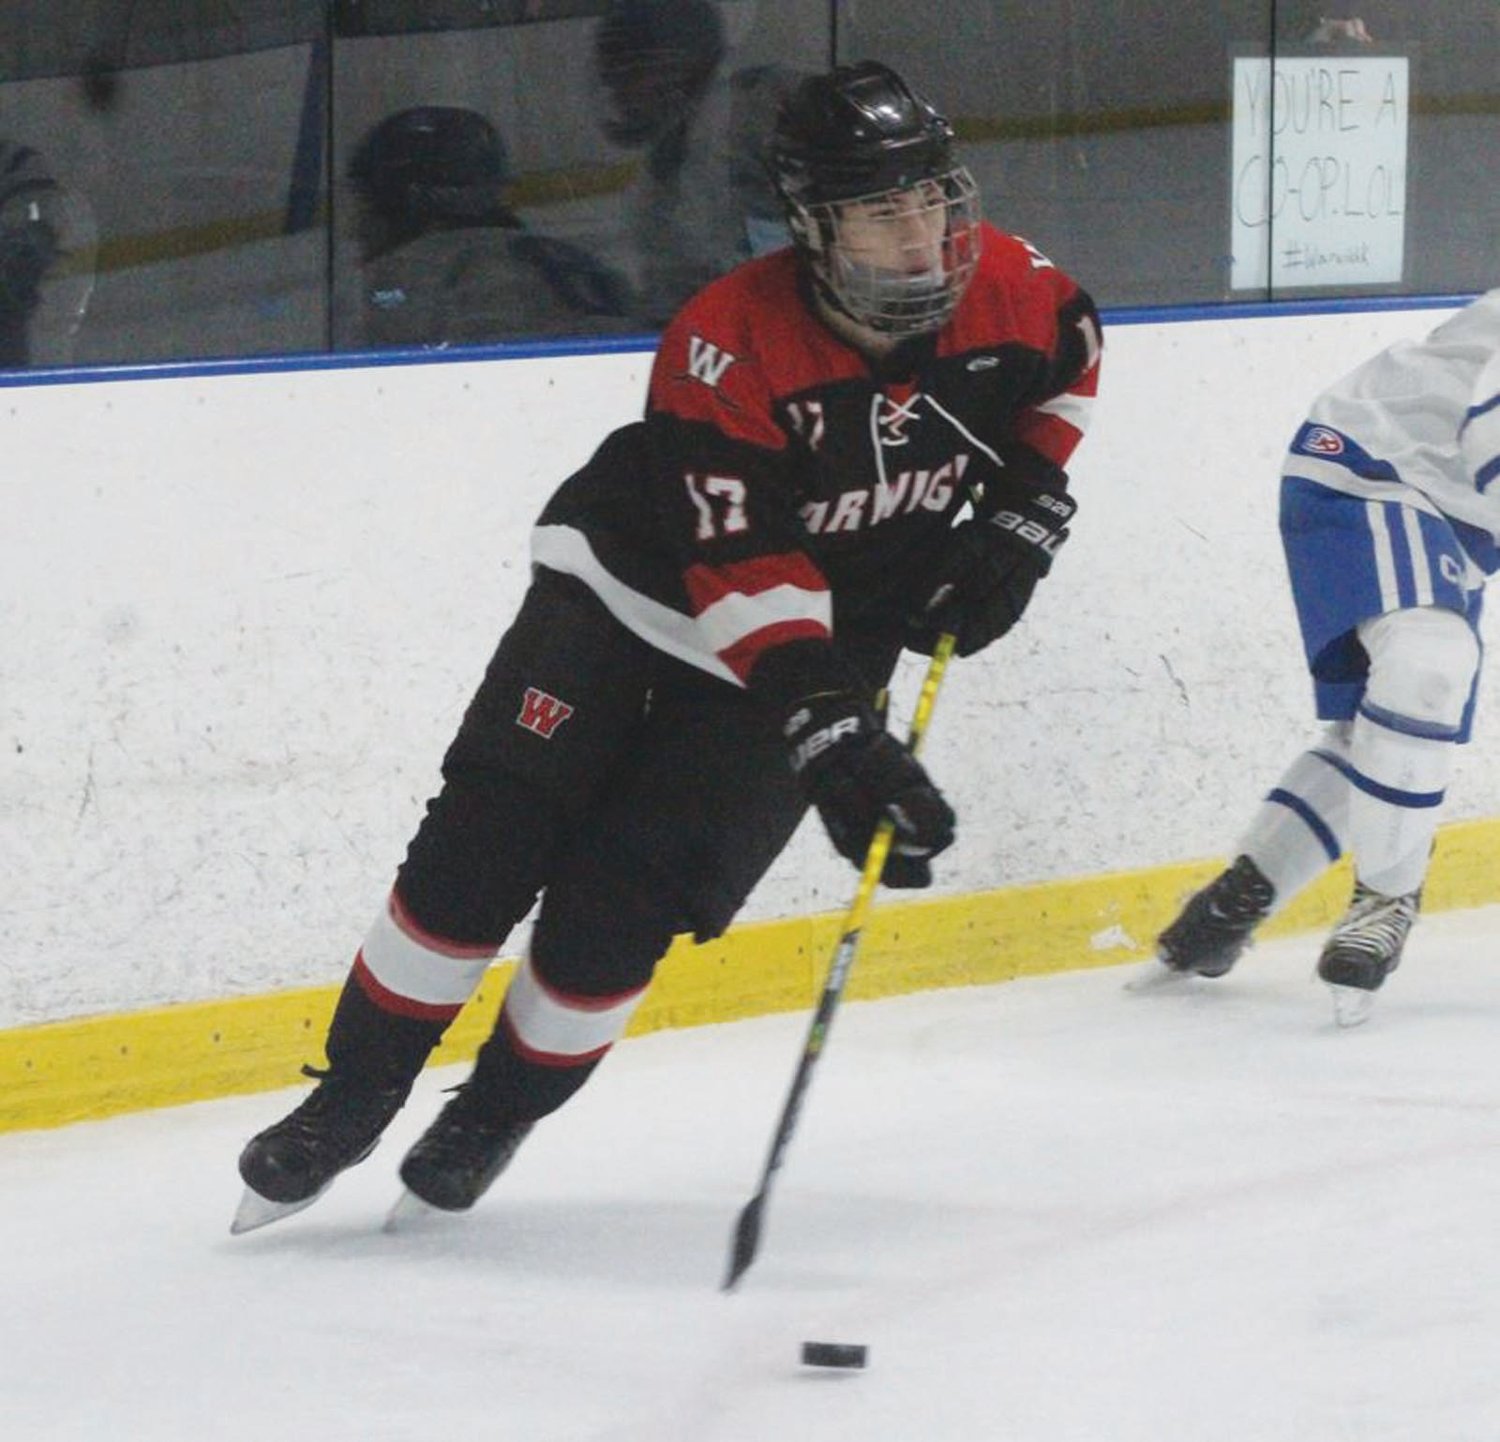 ALONG THE BOARDS: Warwick’s Ryan Barlow works
the puck up the ice.